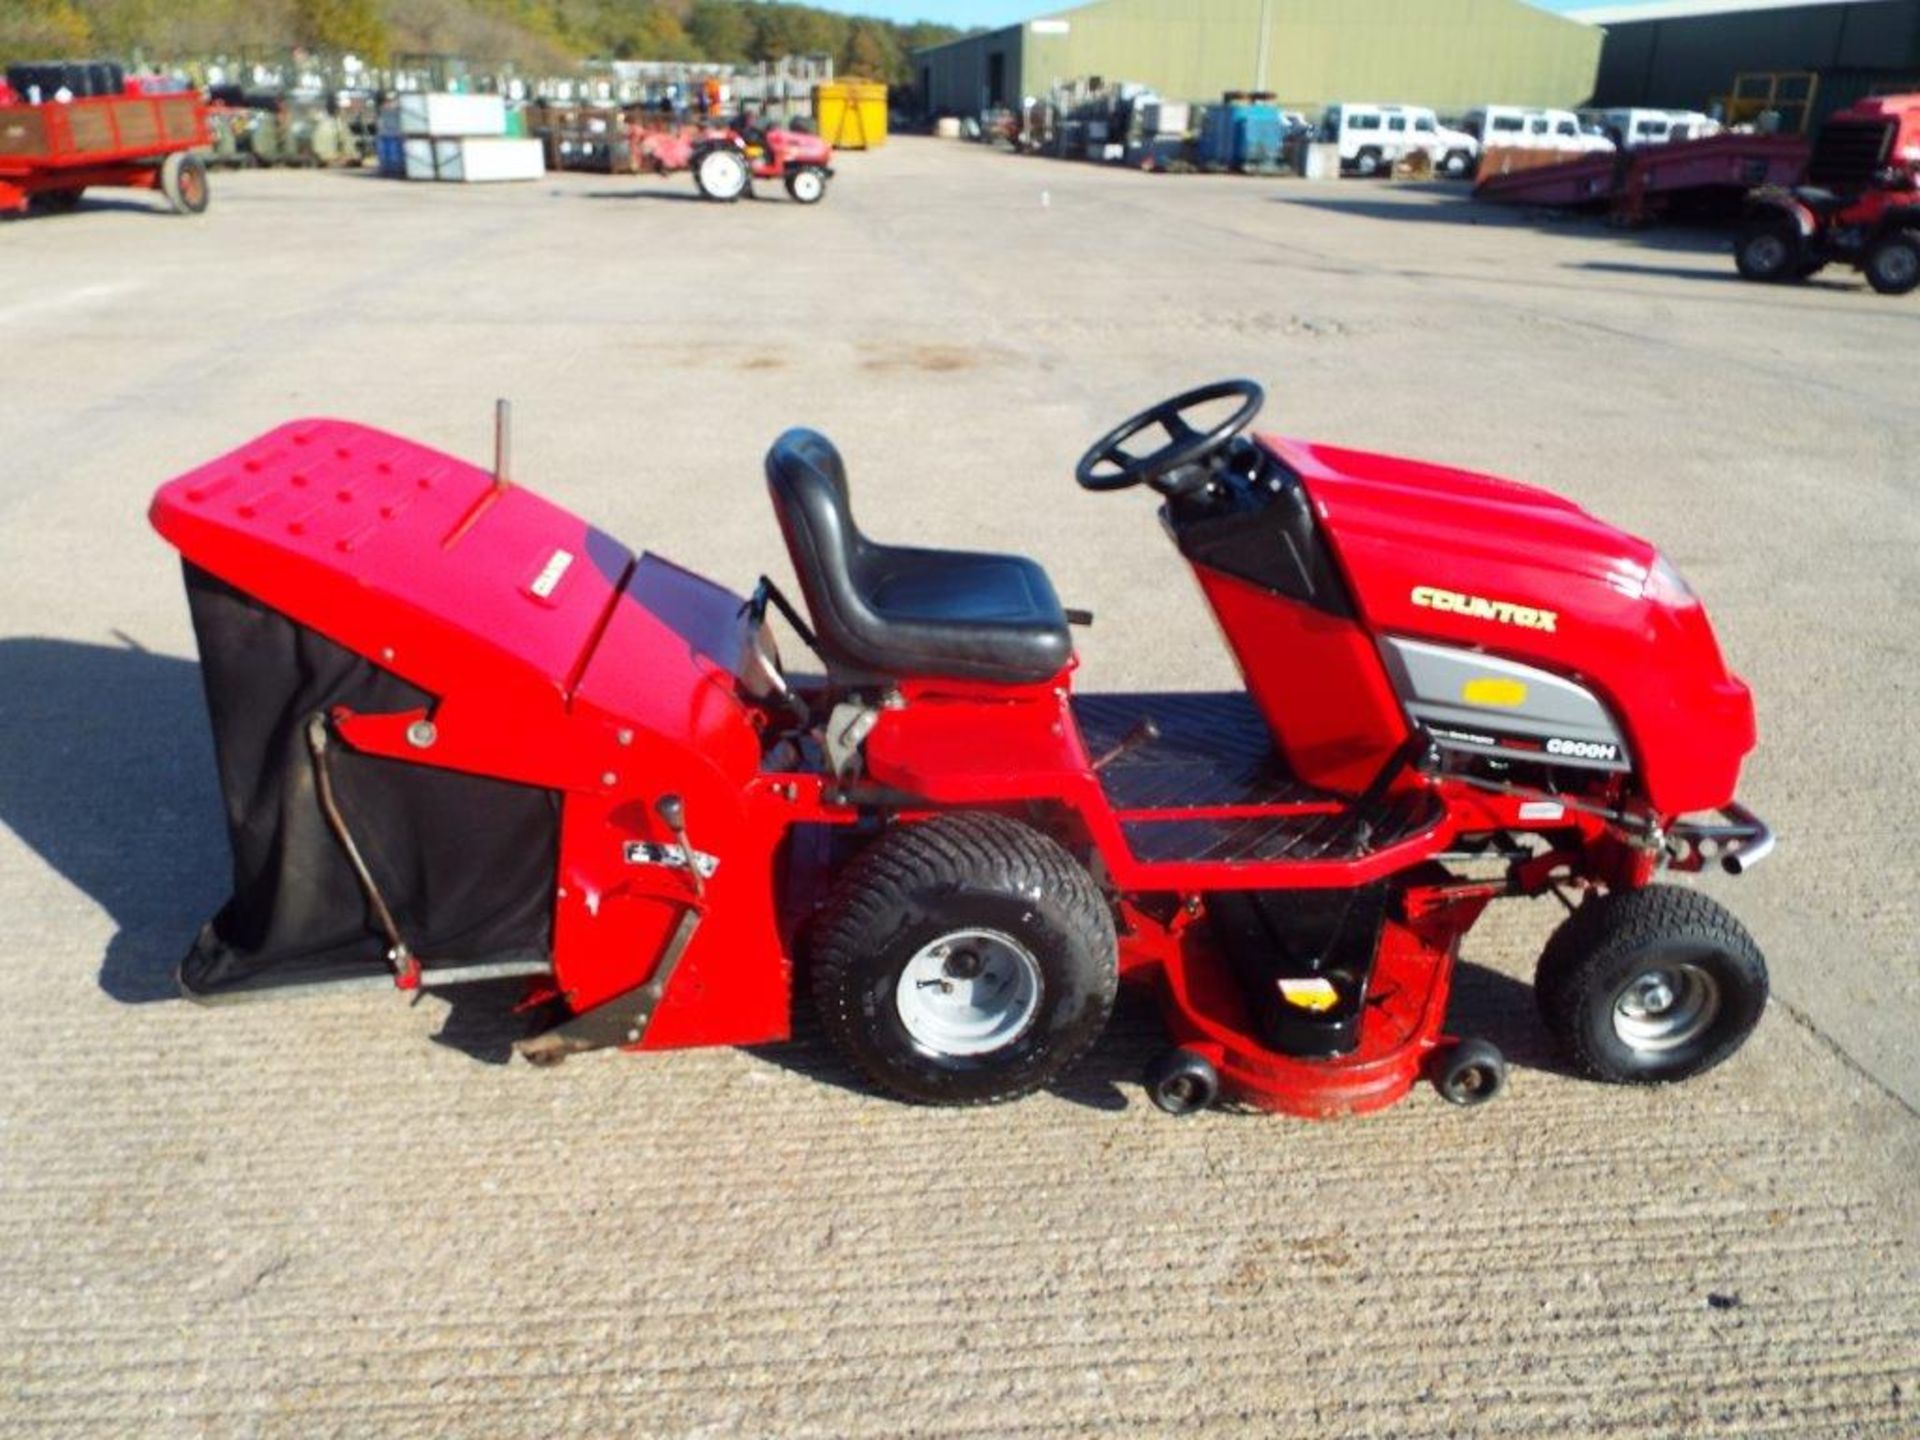 Countax C800H Ride On Mower with Rear Brush and Grass Collector - Image 8 of 20